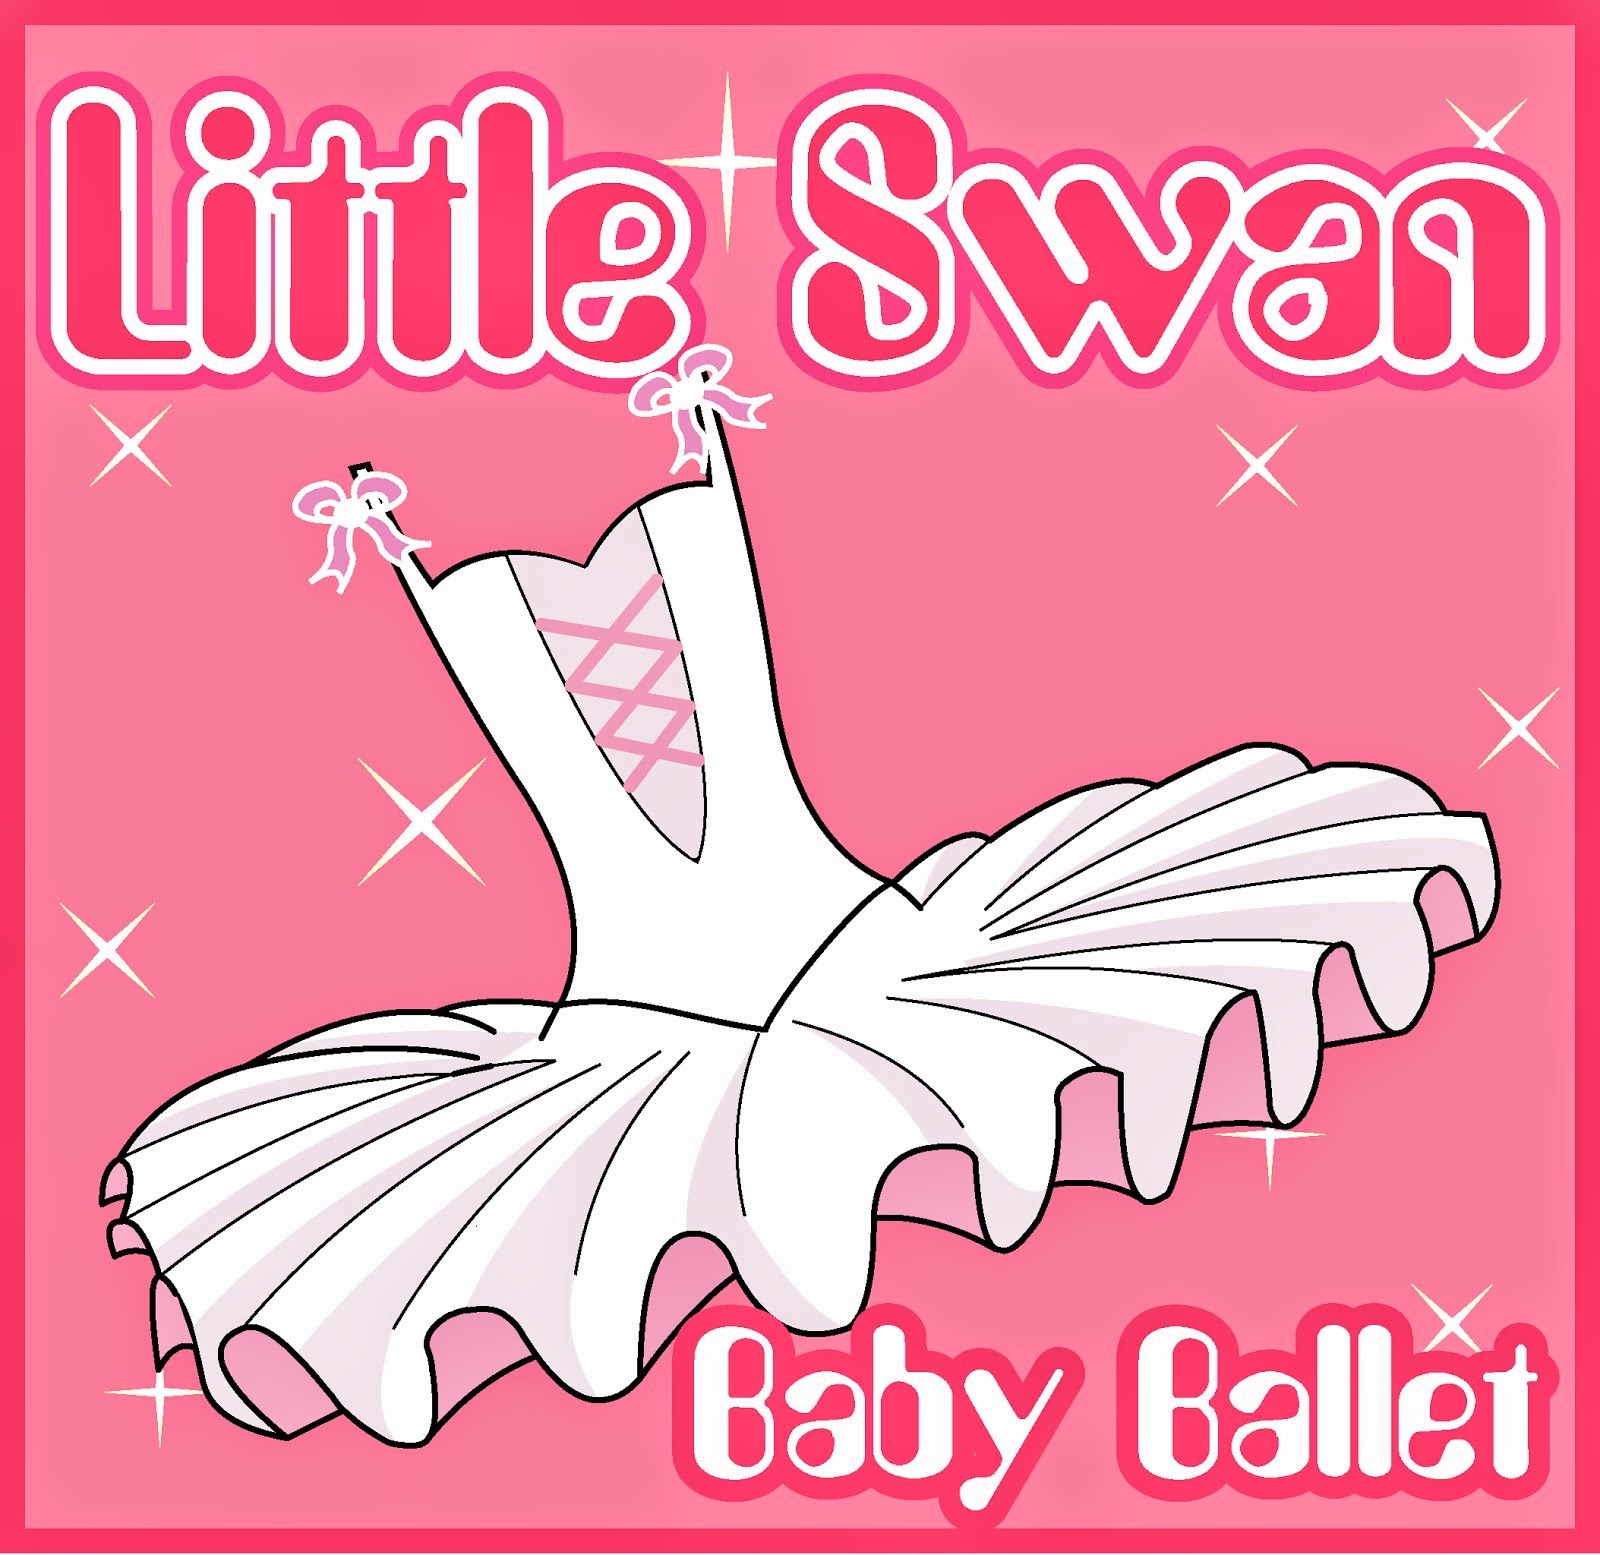 About Little Swan (Baby Ballet)